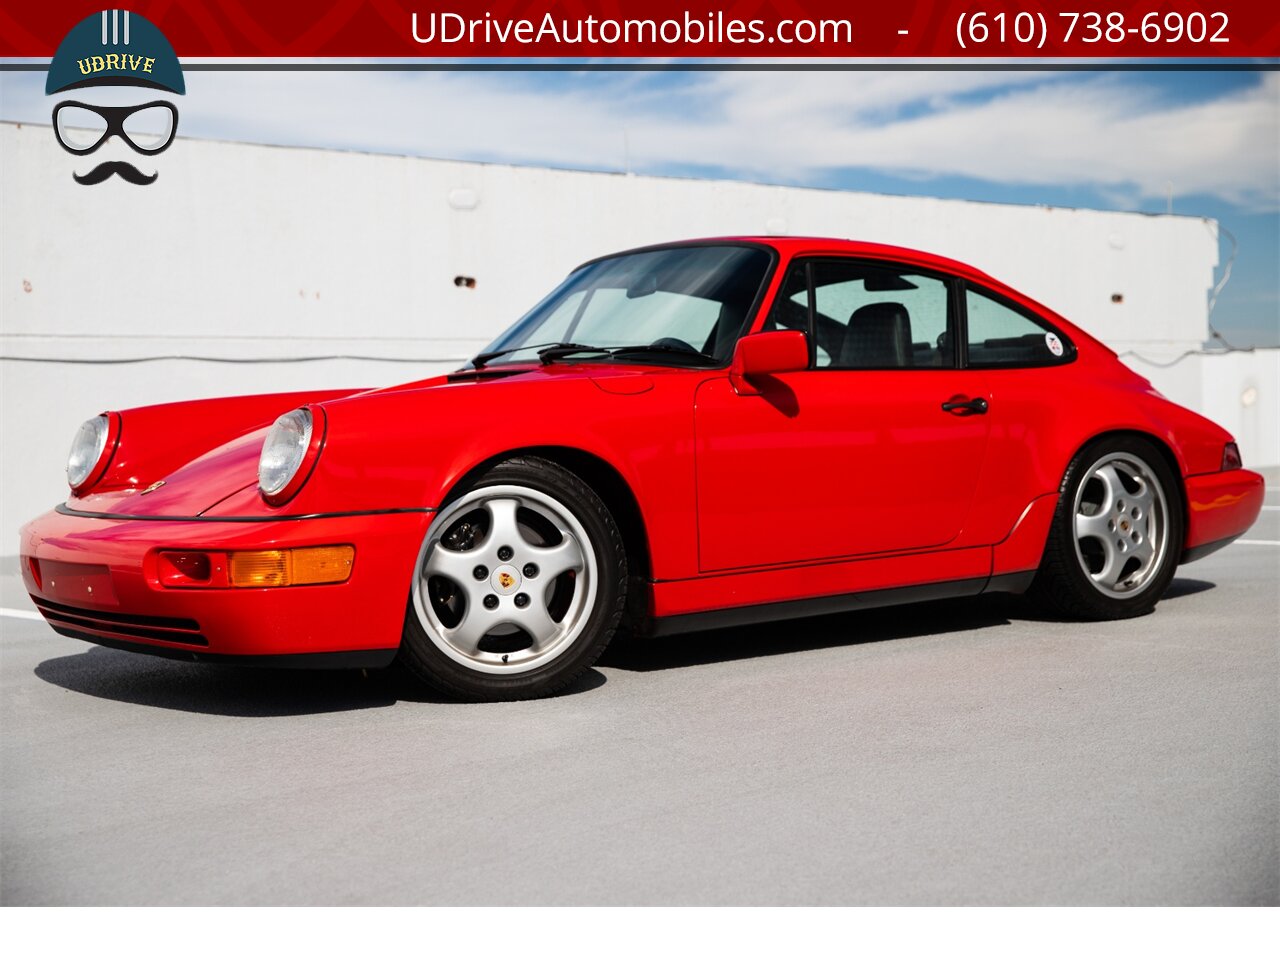 1989 Porsche 911 Carrera 4 964 C4 5 Speed Engine Rebuild  $40k in Service History Cup 1 Wheels - Photo 1 - West Chester, PA 19382